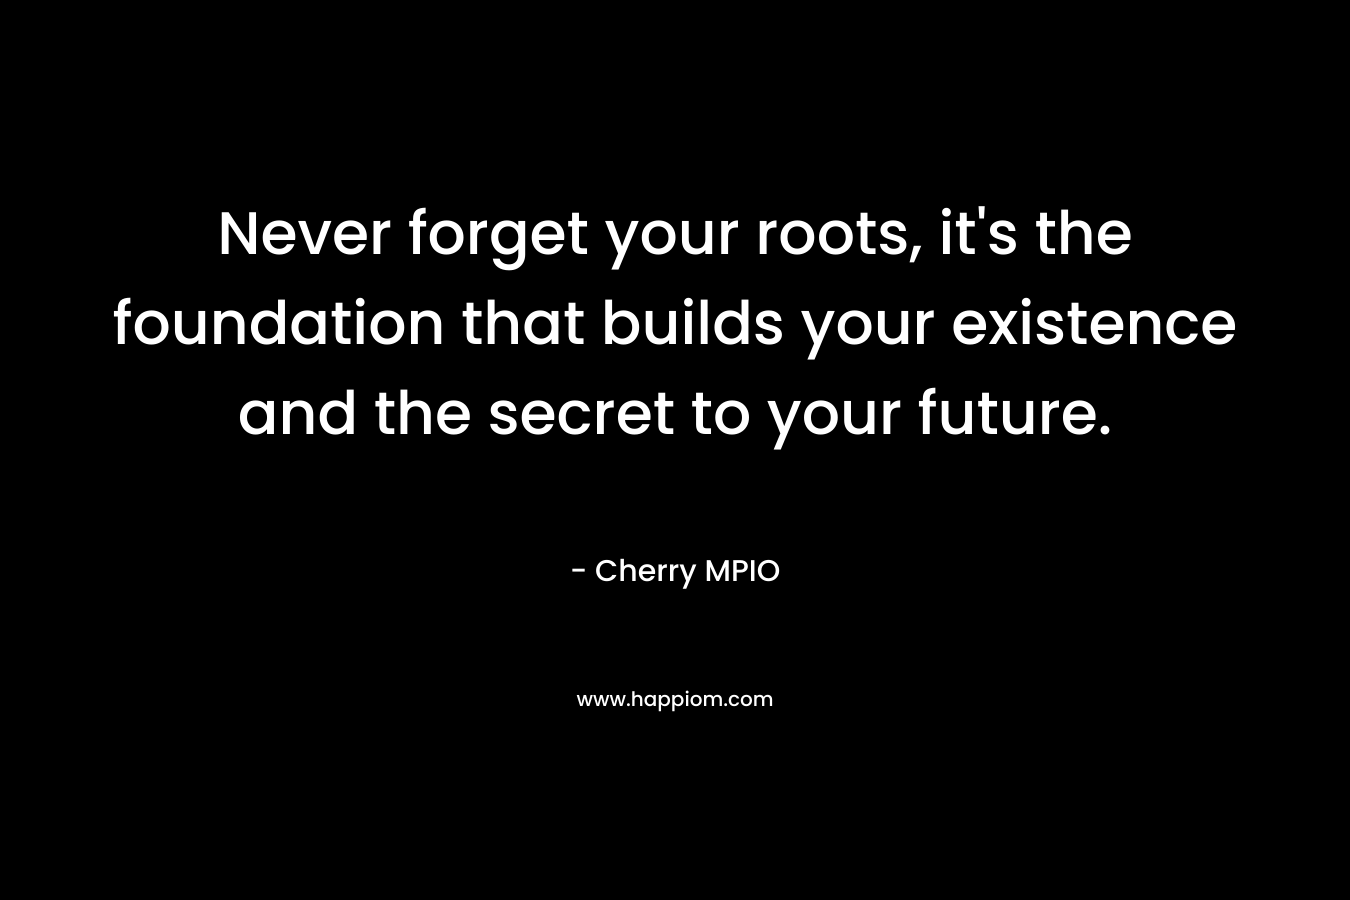 Never forget your roots, it's the foundation that builds your existence and the secret to your future.